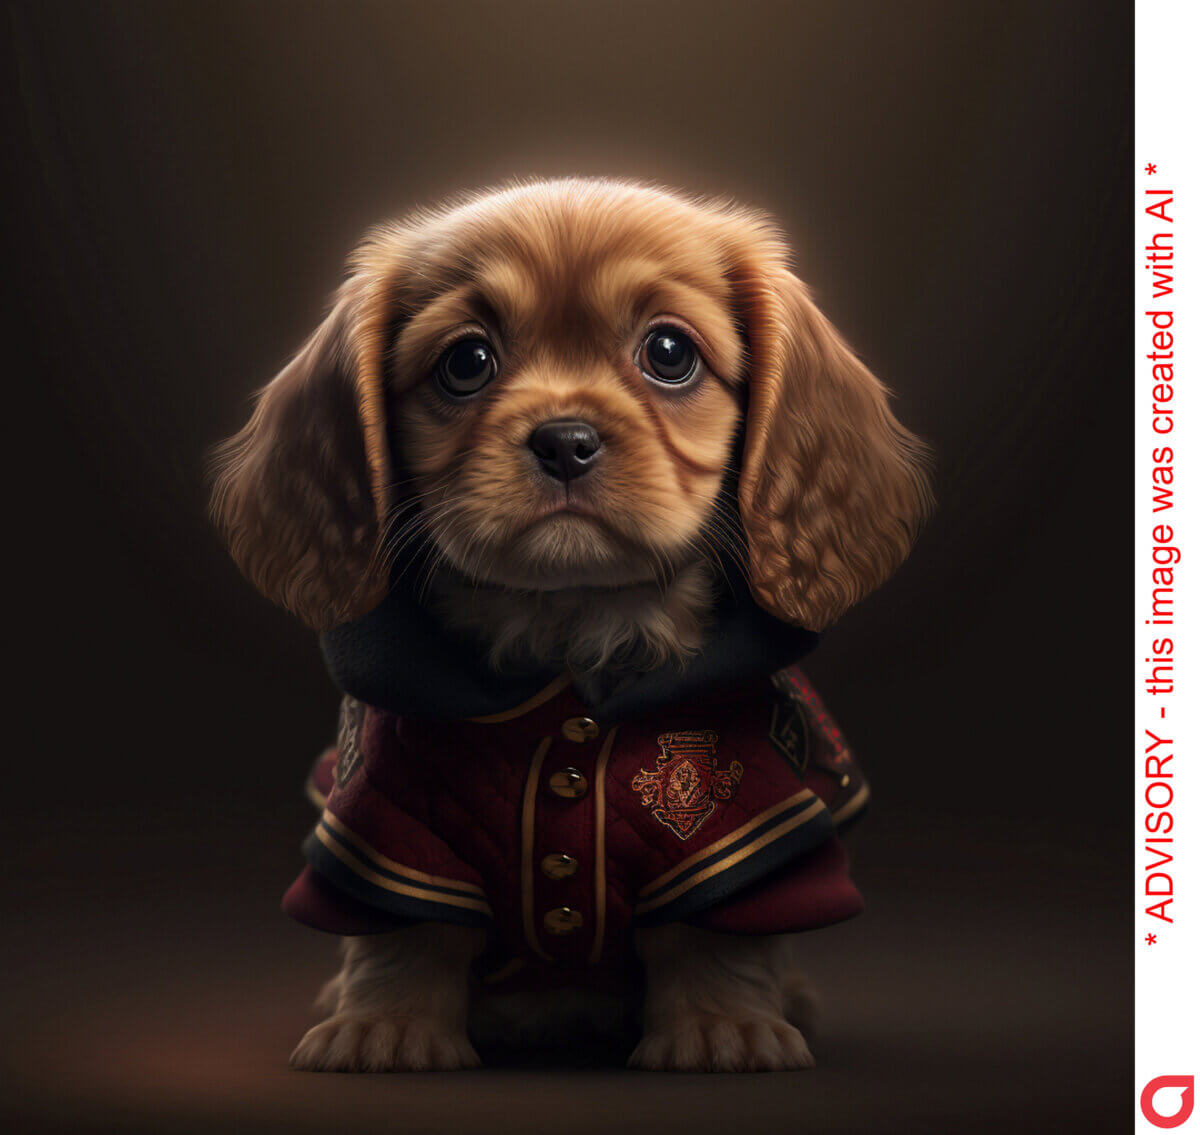 An AI generated image of Hermione Granger as a puppy.